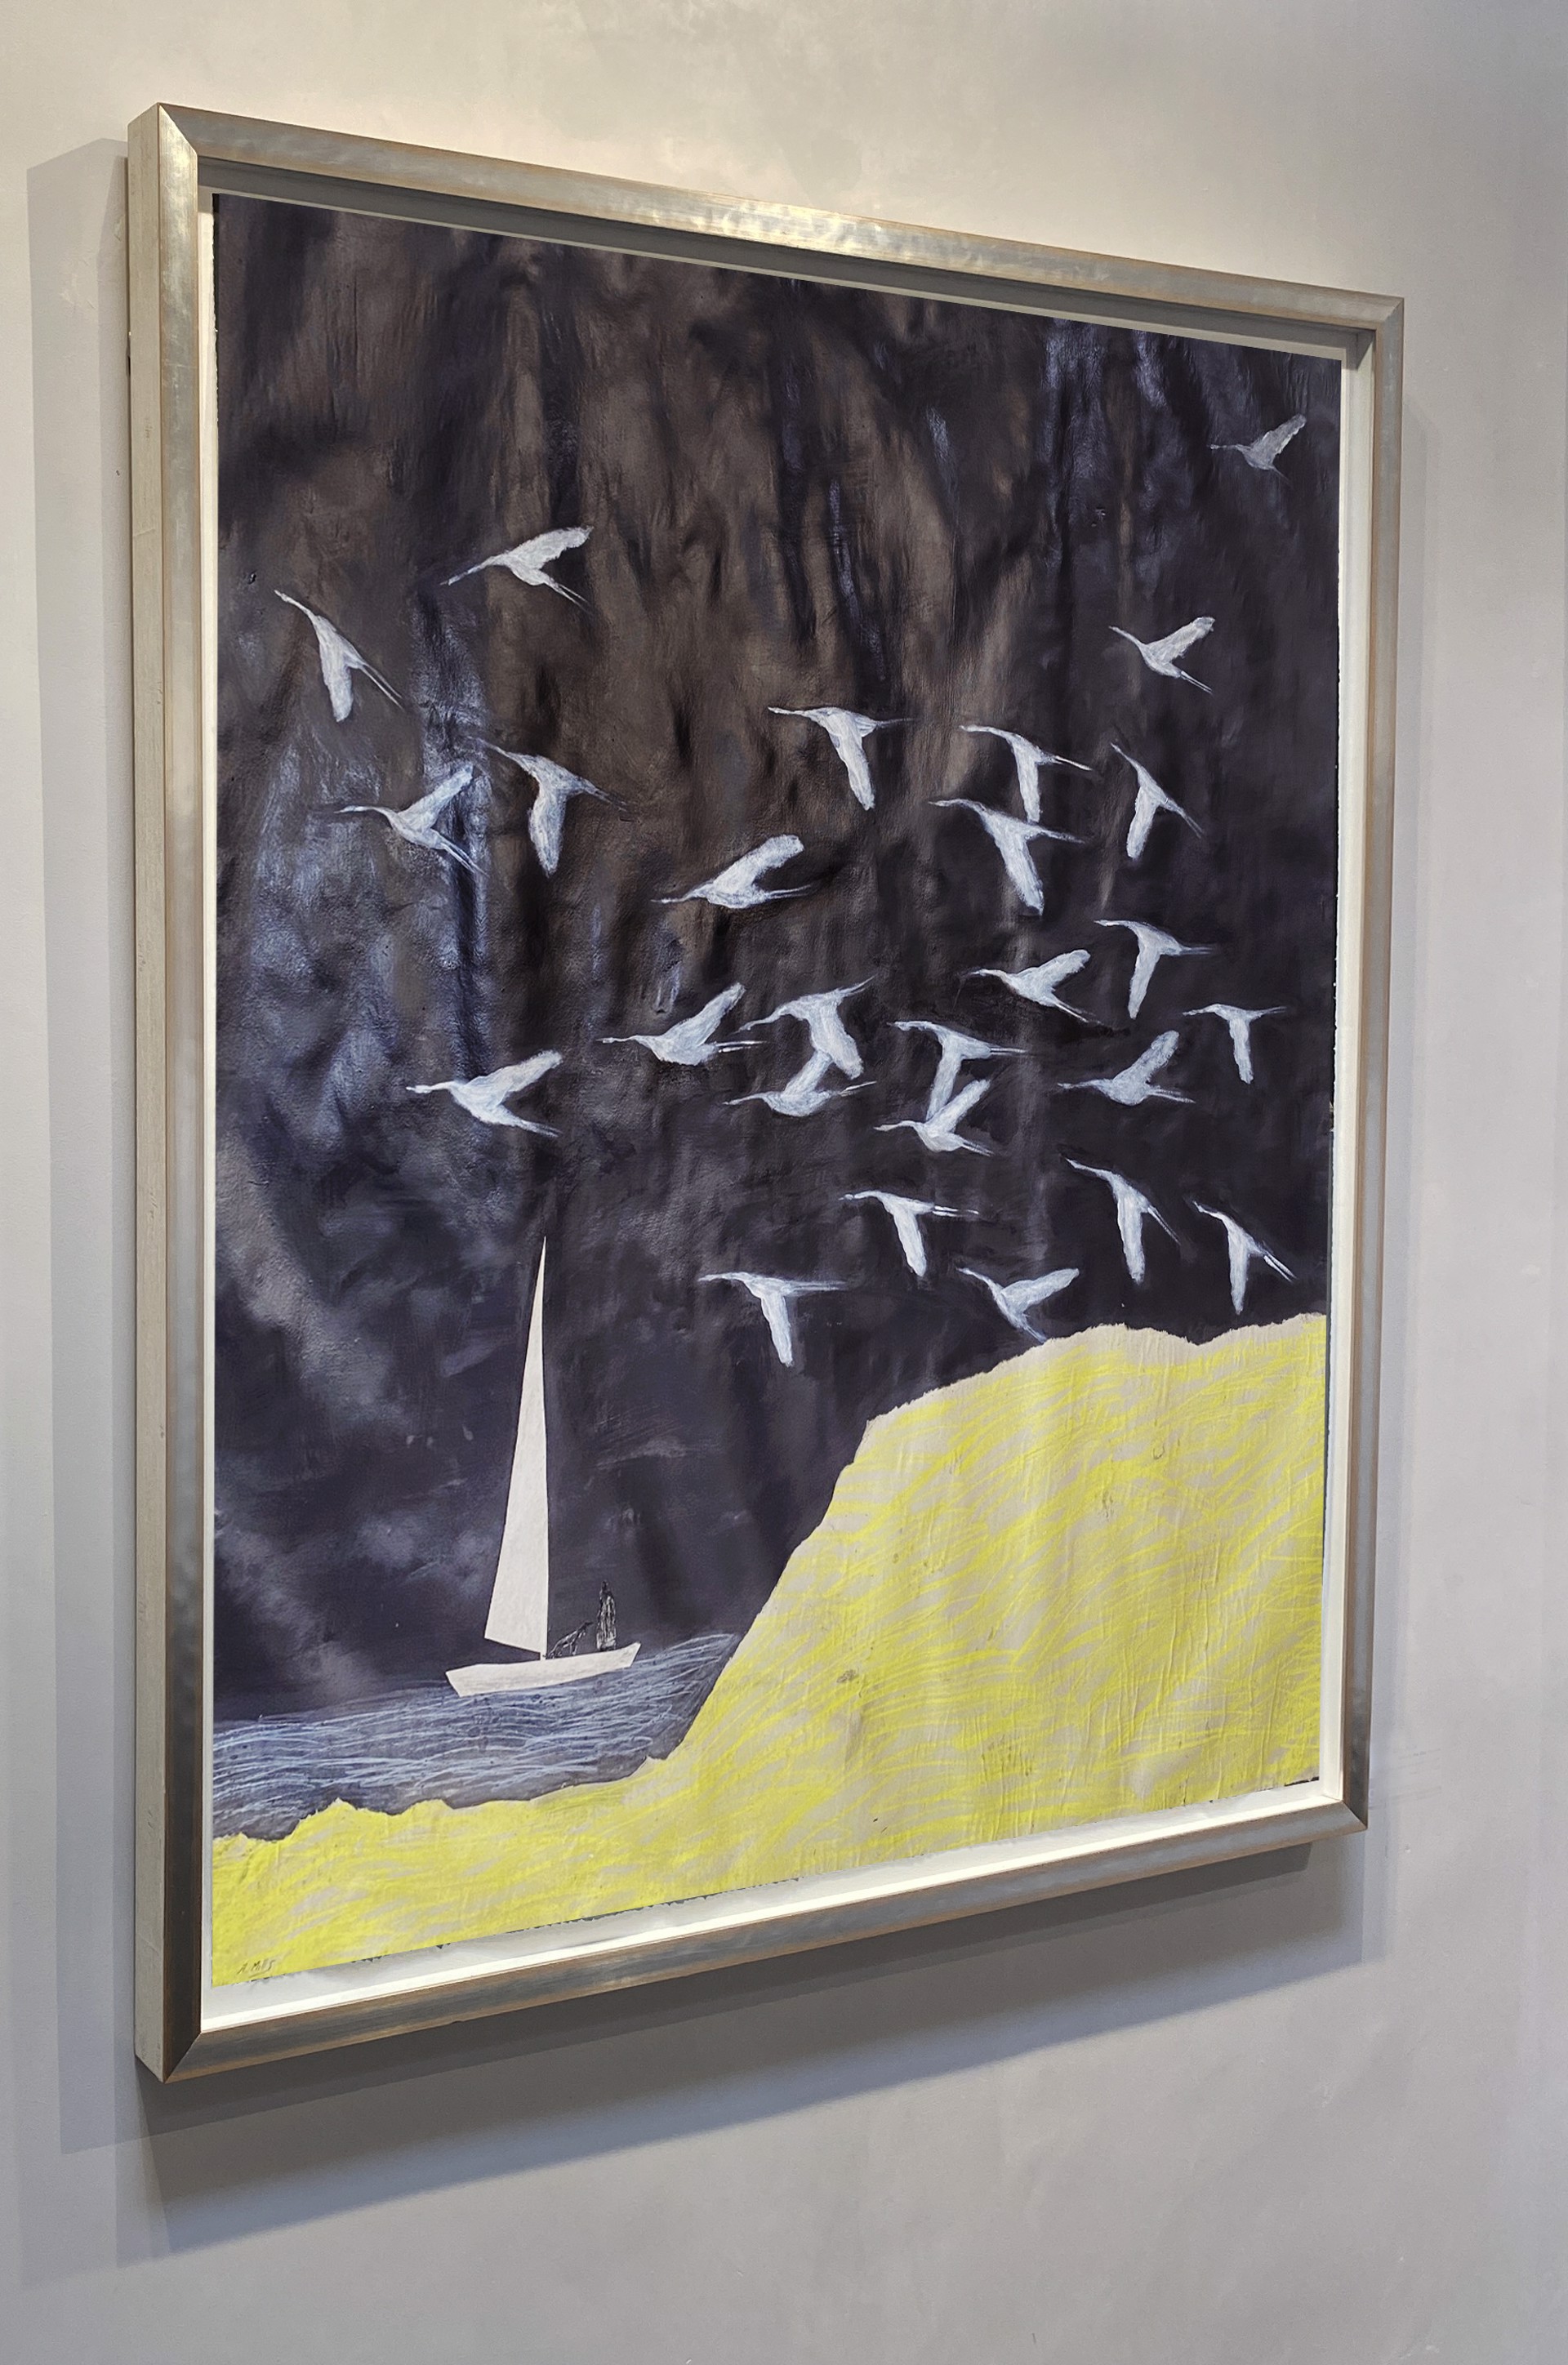 Night Sail/Cliff and Geese by Gigi Mills